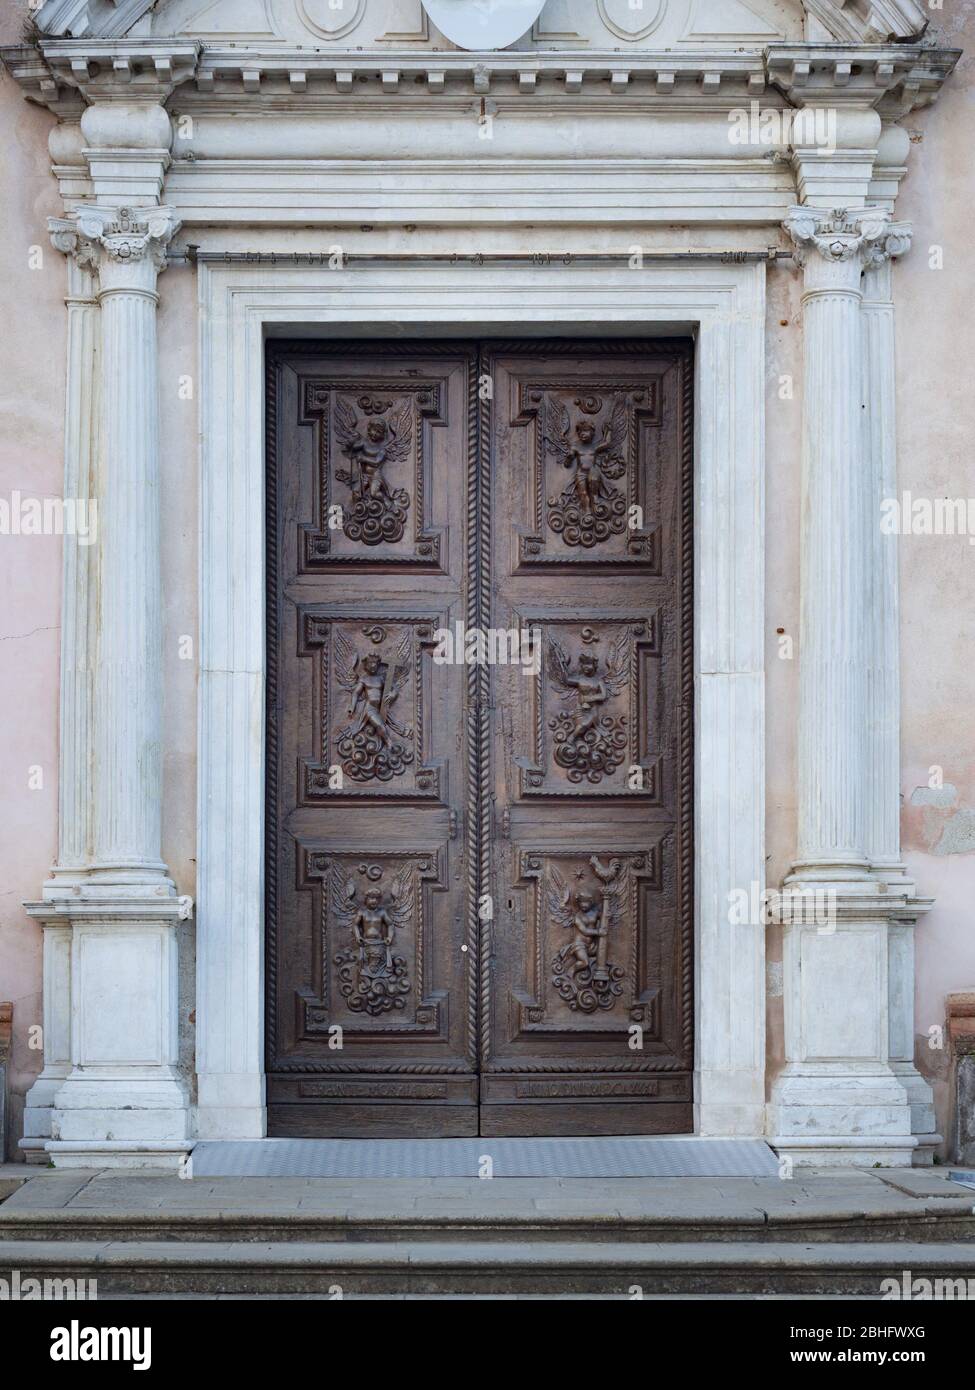 Carved wooden portal with scenes of saints from an ancient Italian church. Stock Photo